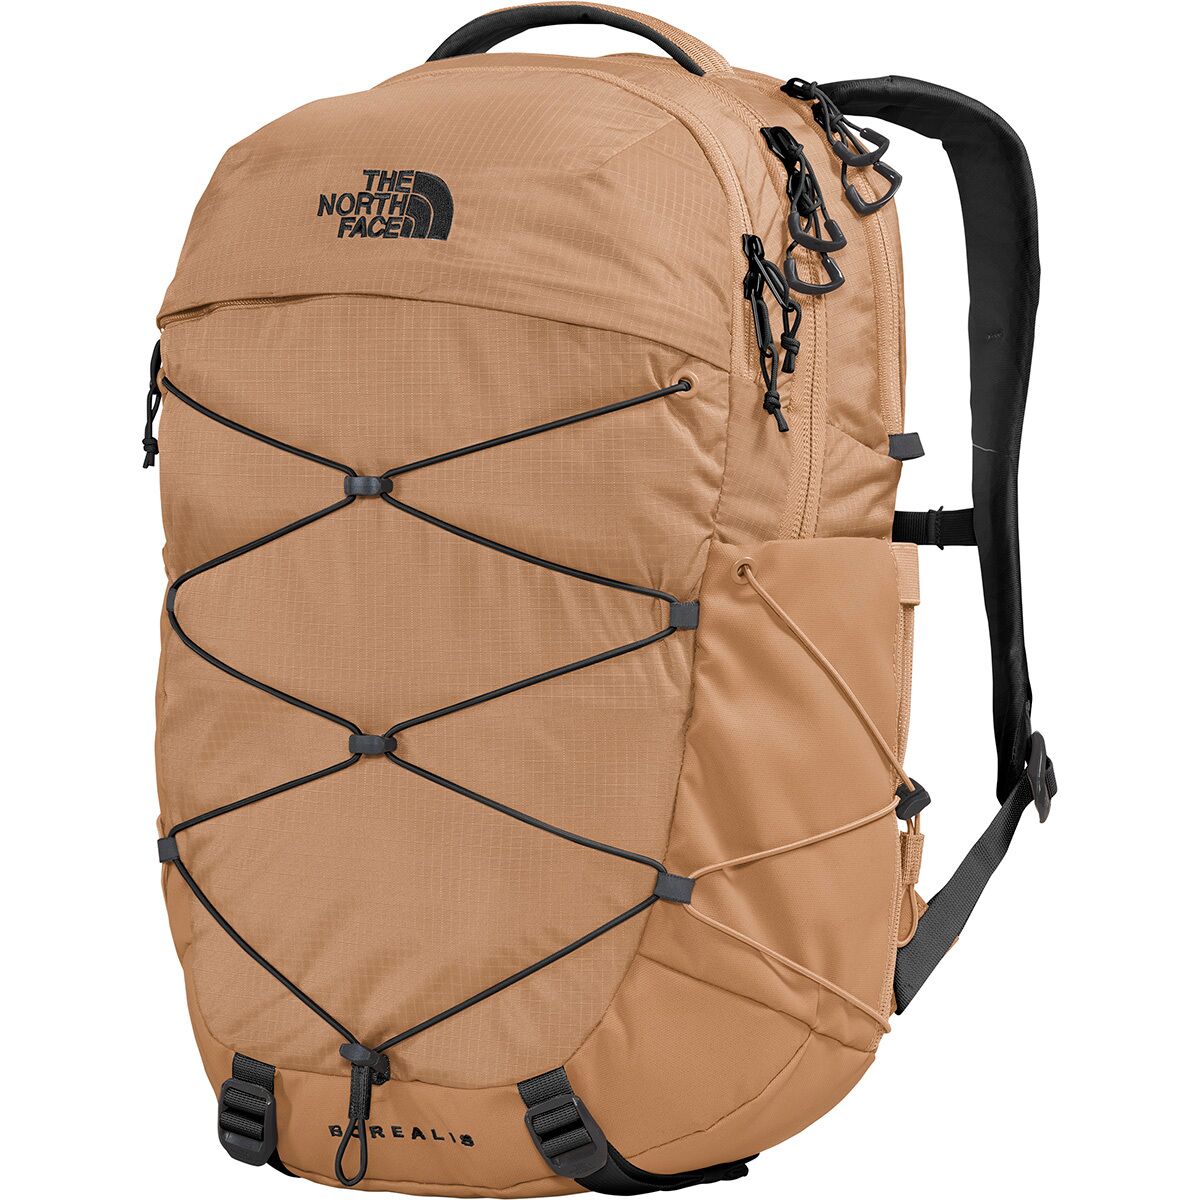 The North Face Borealis 27L Backpack - Women's